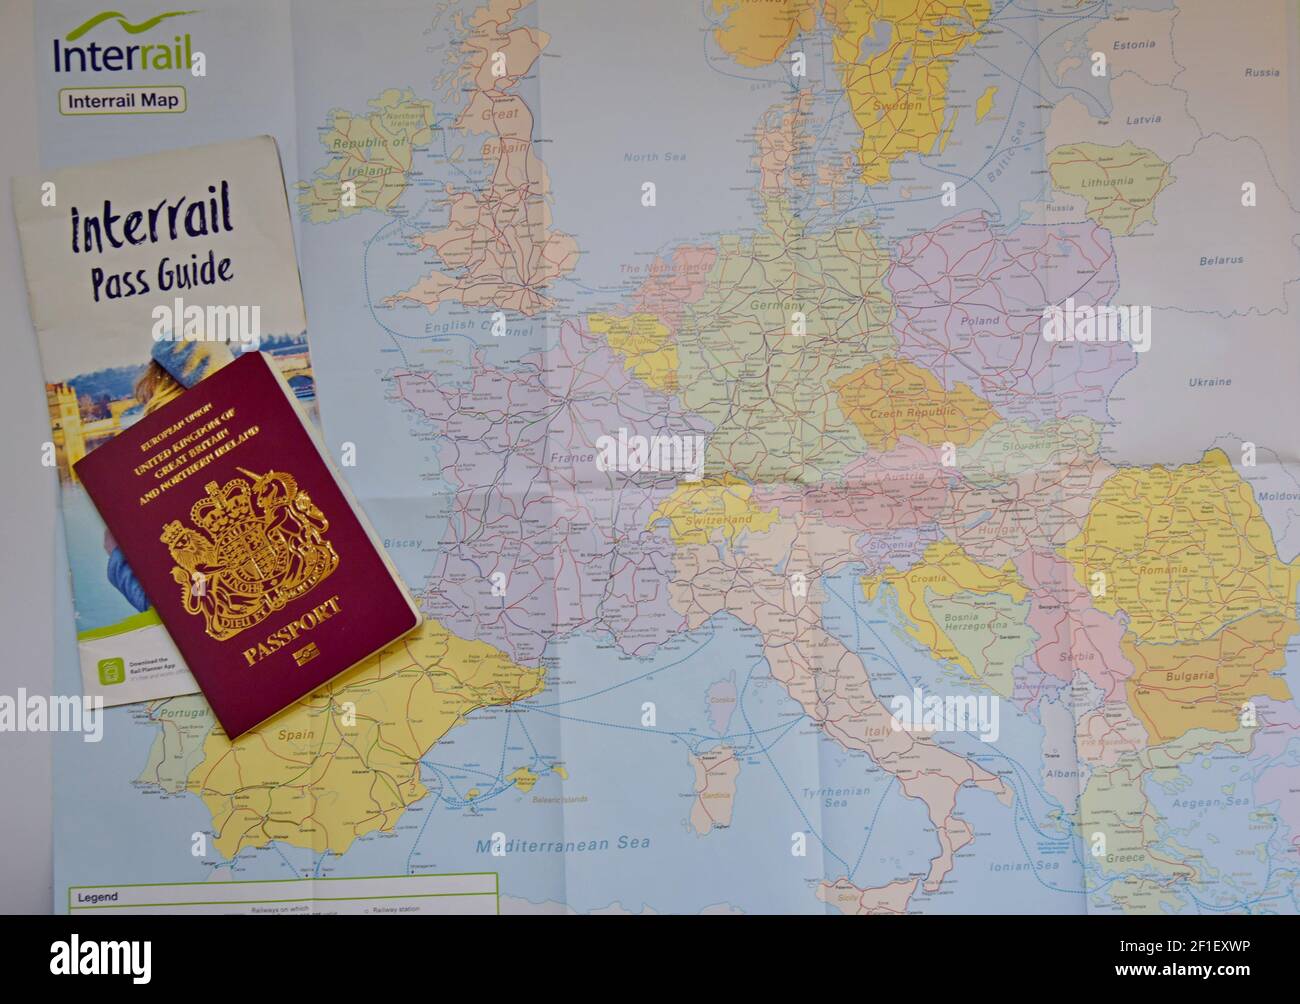 A British Passport with an Interrail guide laying on an Interrail map of Europe, ready to travel by train across Europe Stock Photo